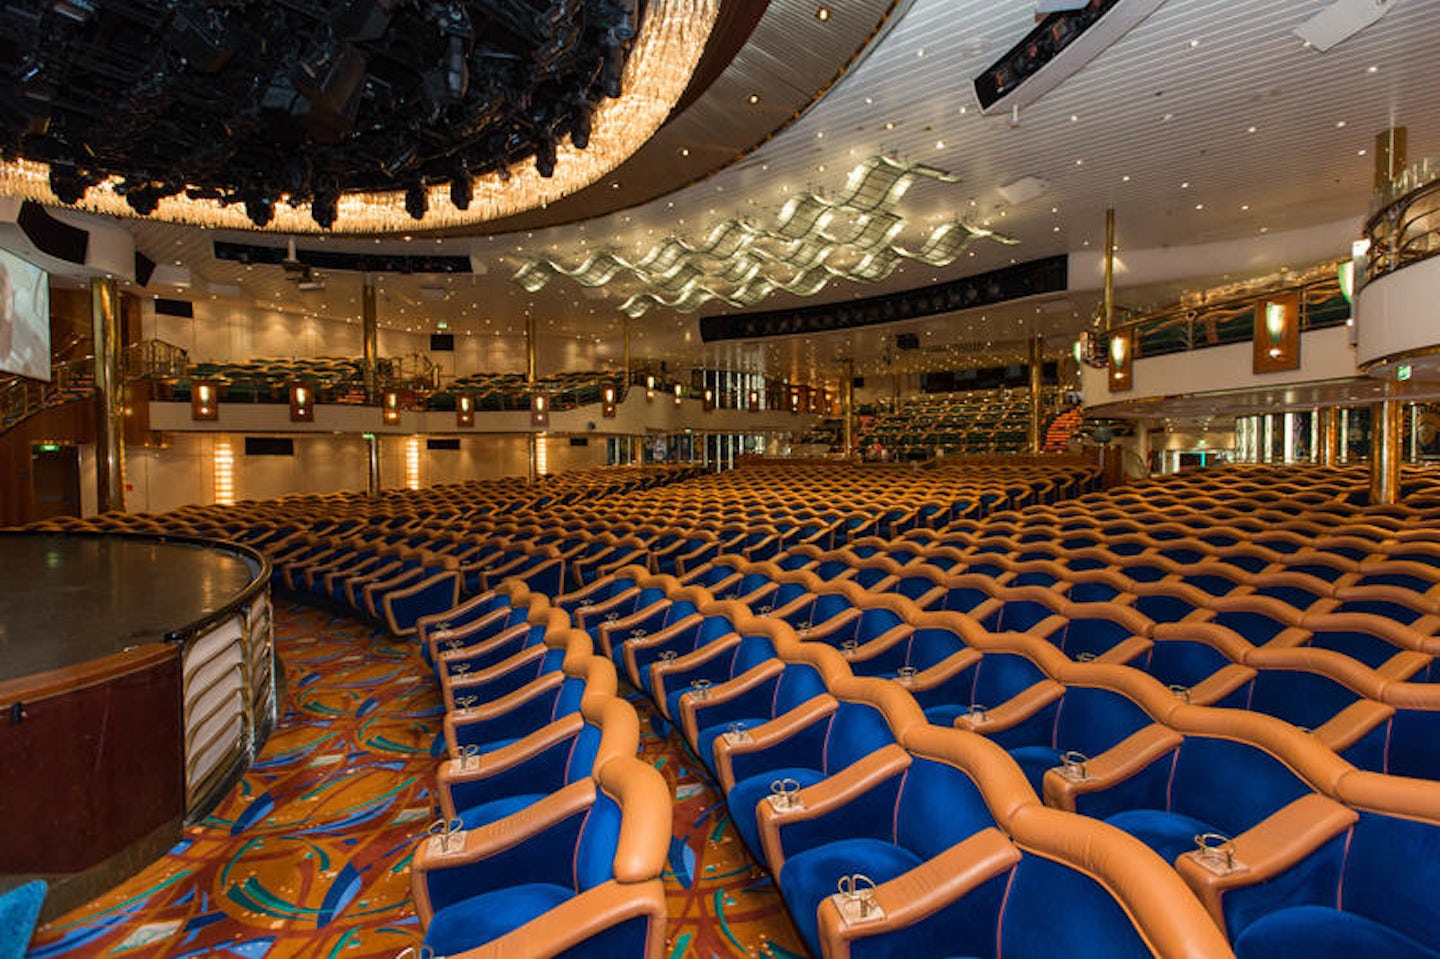 Masquerade Theater on Vision of the Seas